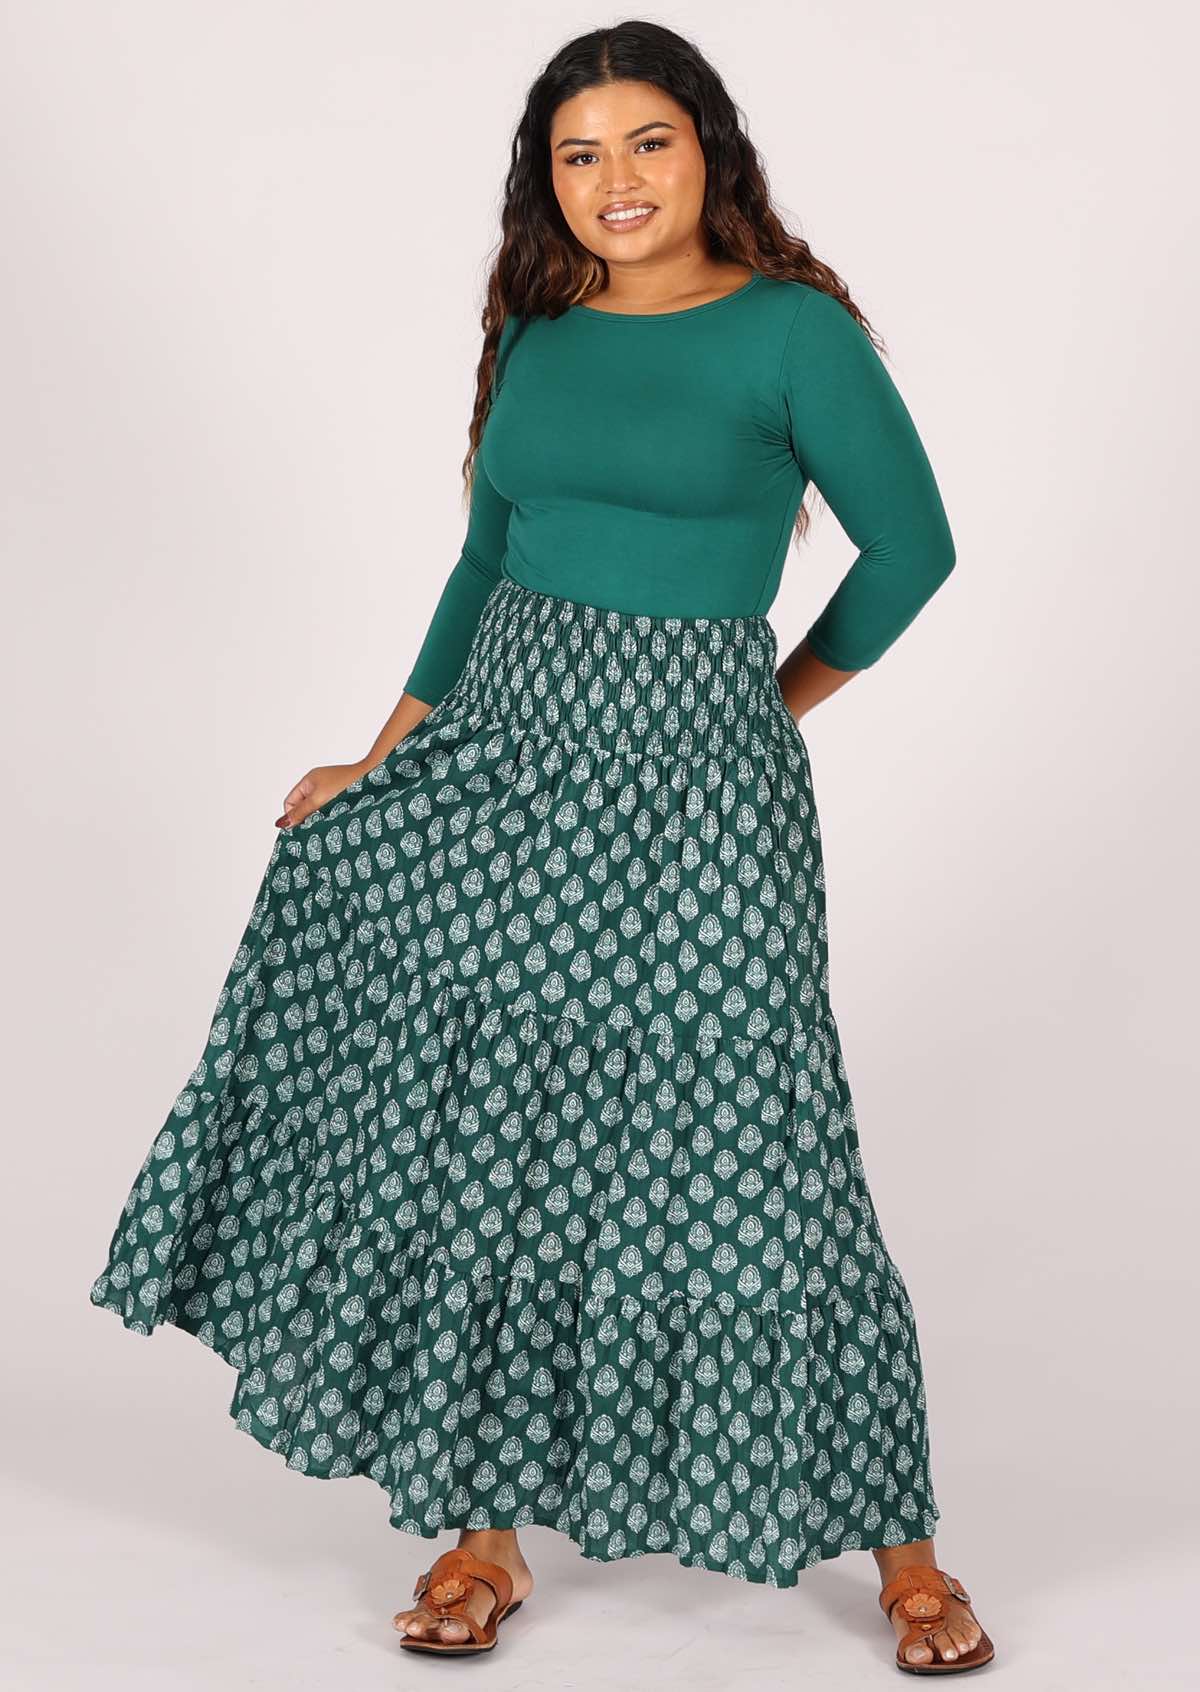 Generous tiers of cotton has this maxi skirt